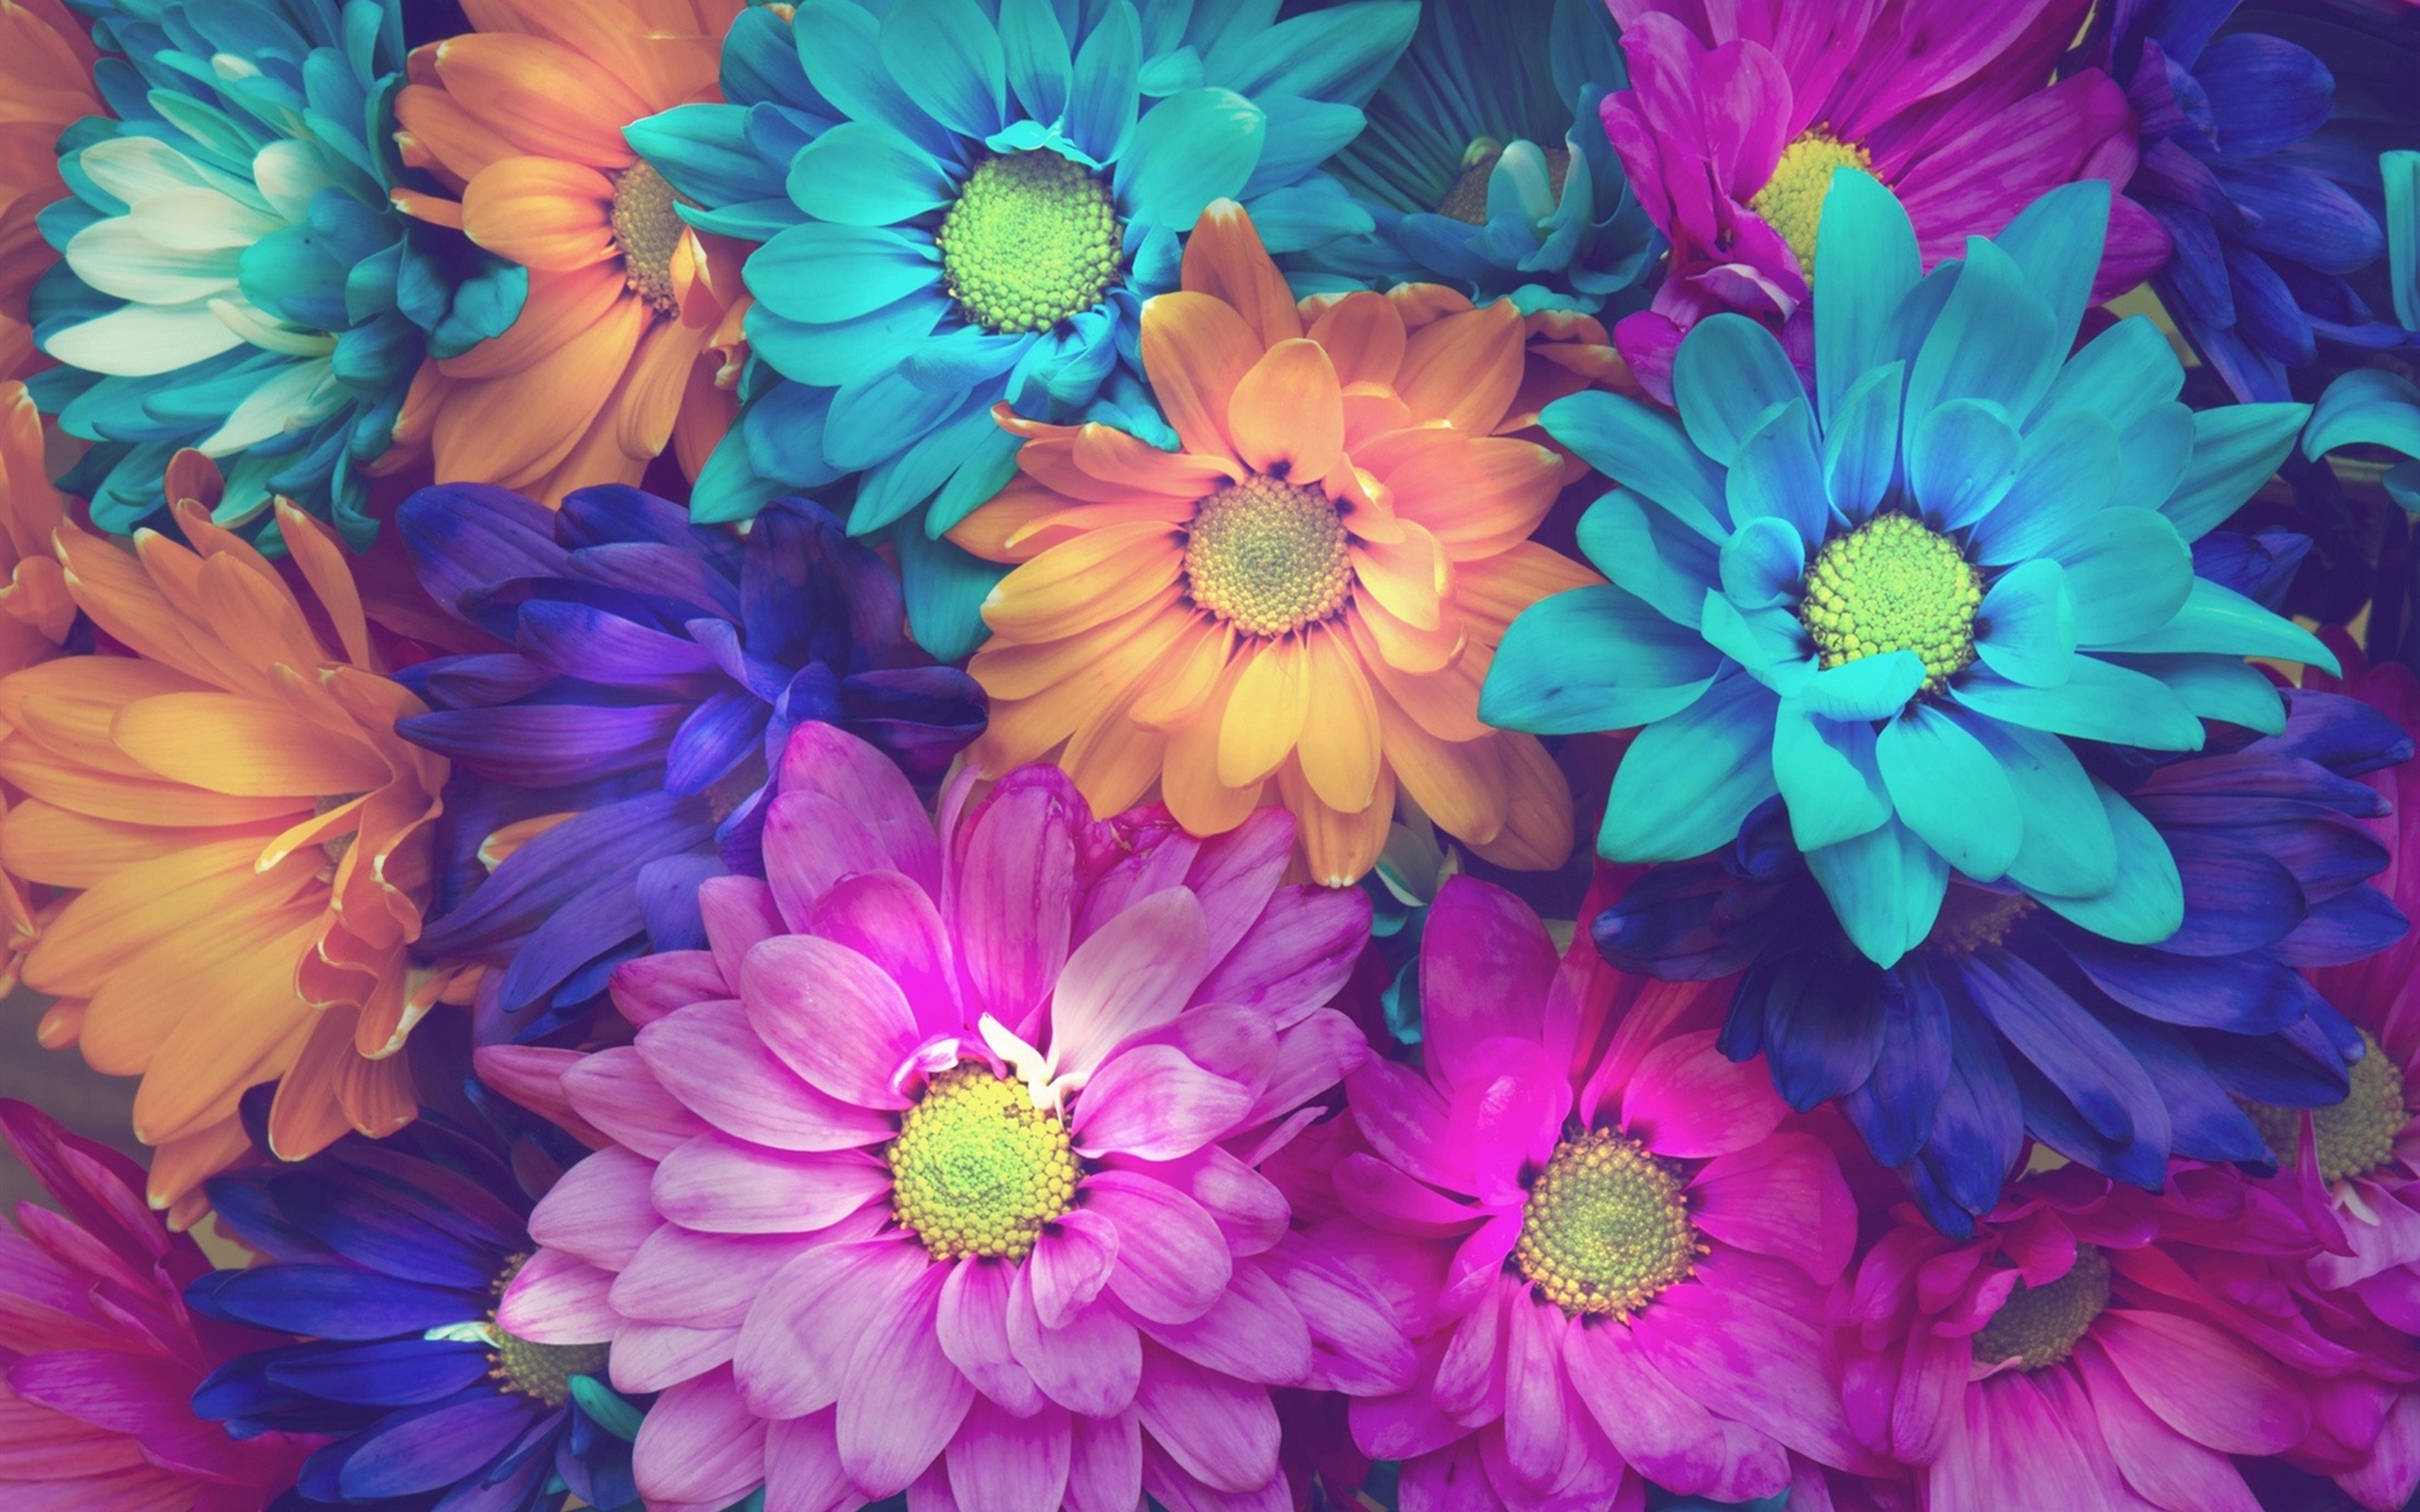 Colorful Daisy Flowers Pink Blue Orange Background Wallpaper 2560x1600 :  